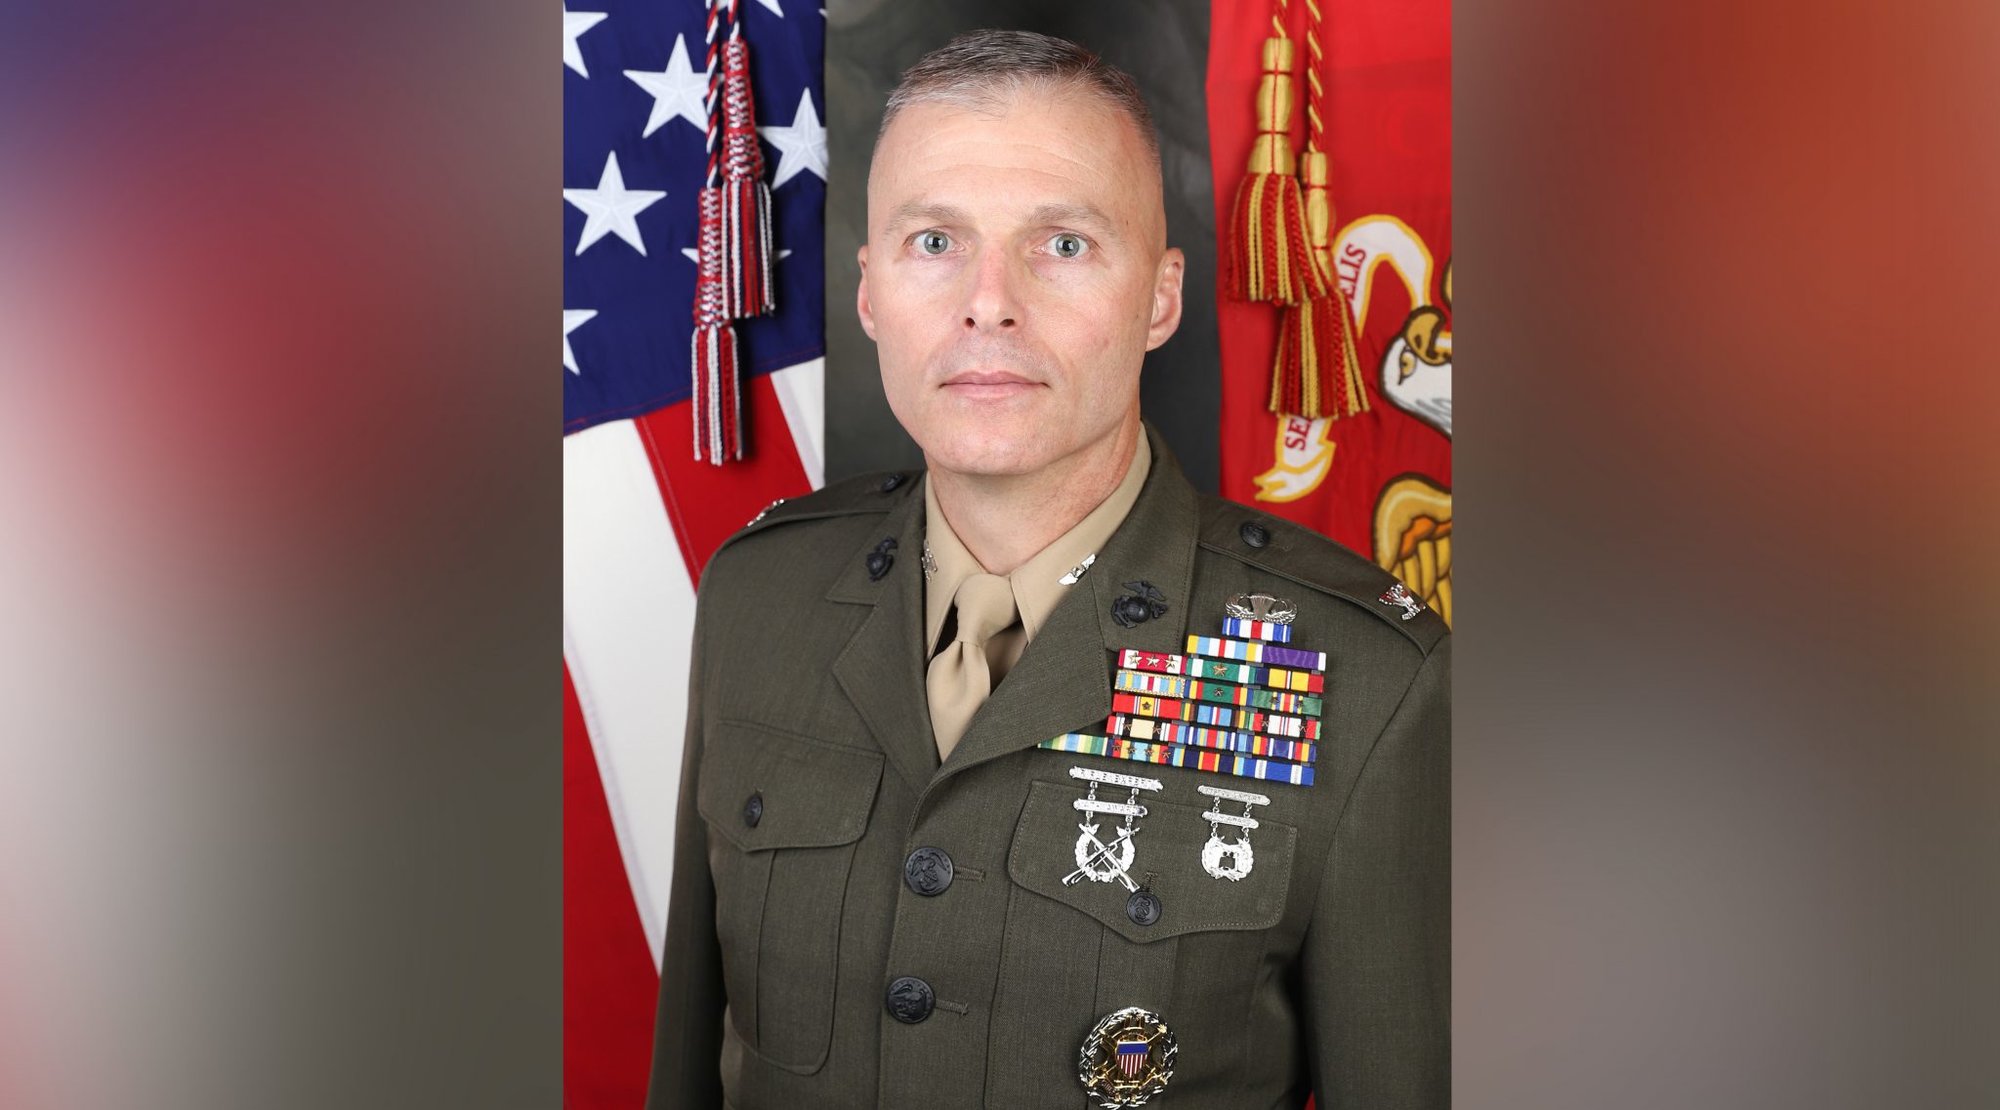 Col. Christopher J. Bronzi relieved of command after AAV incident